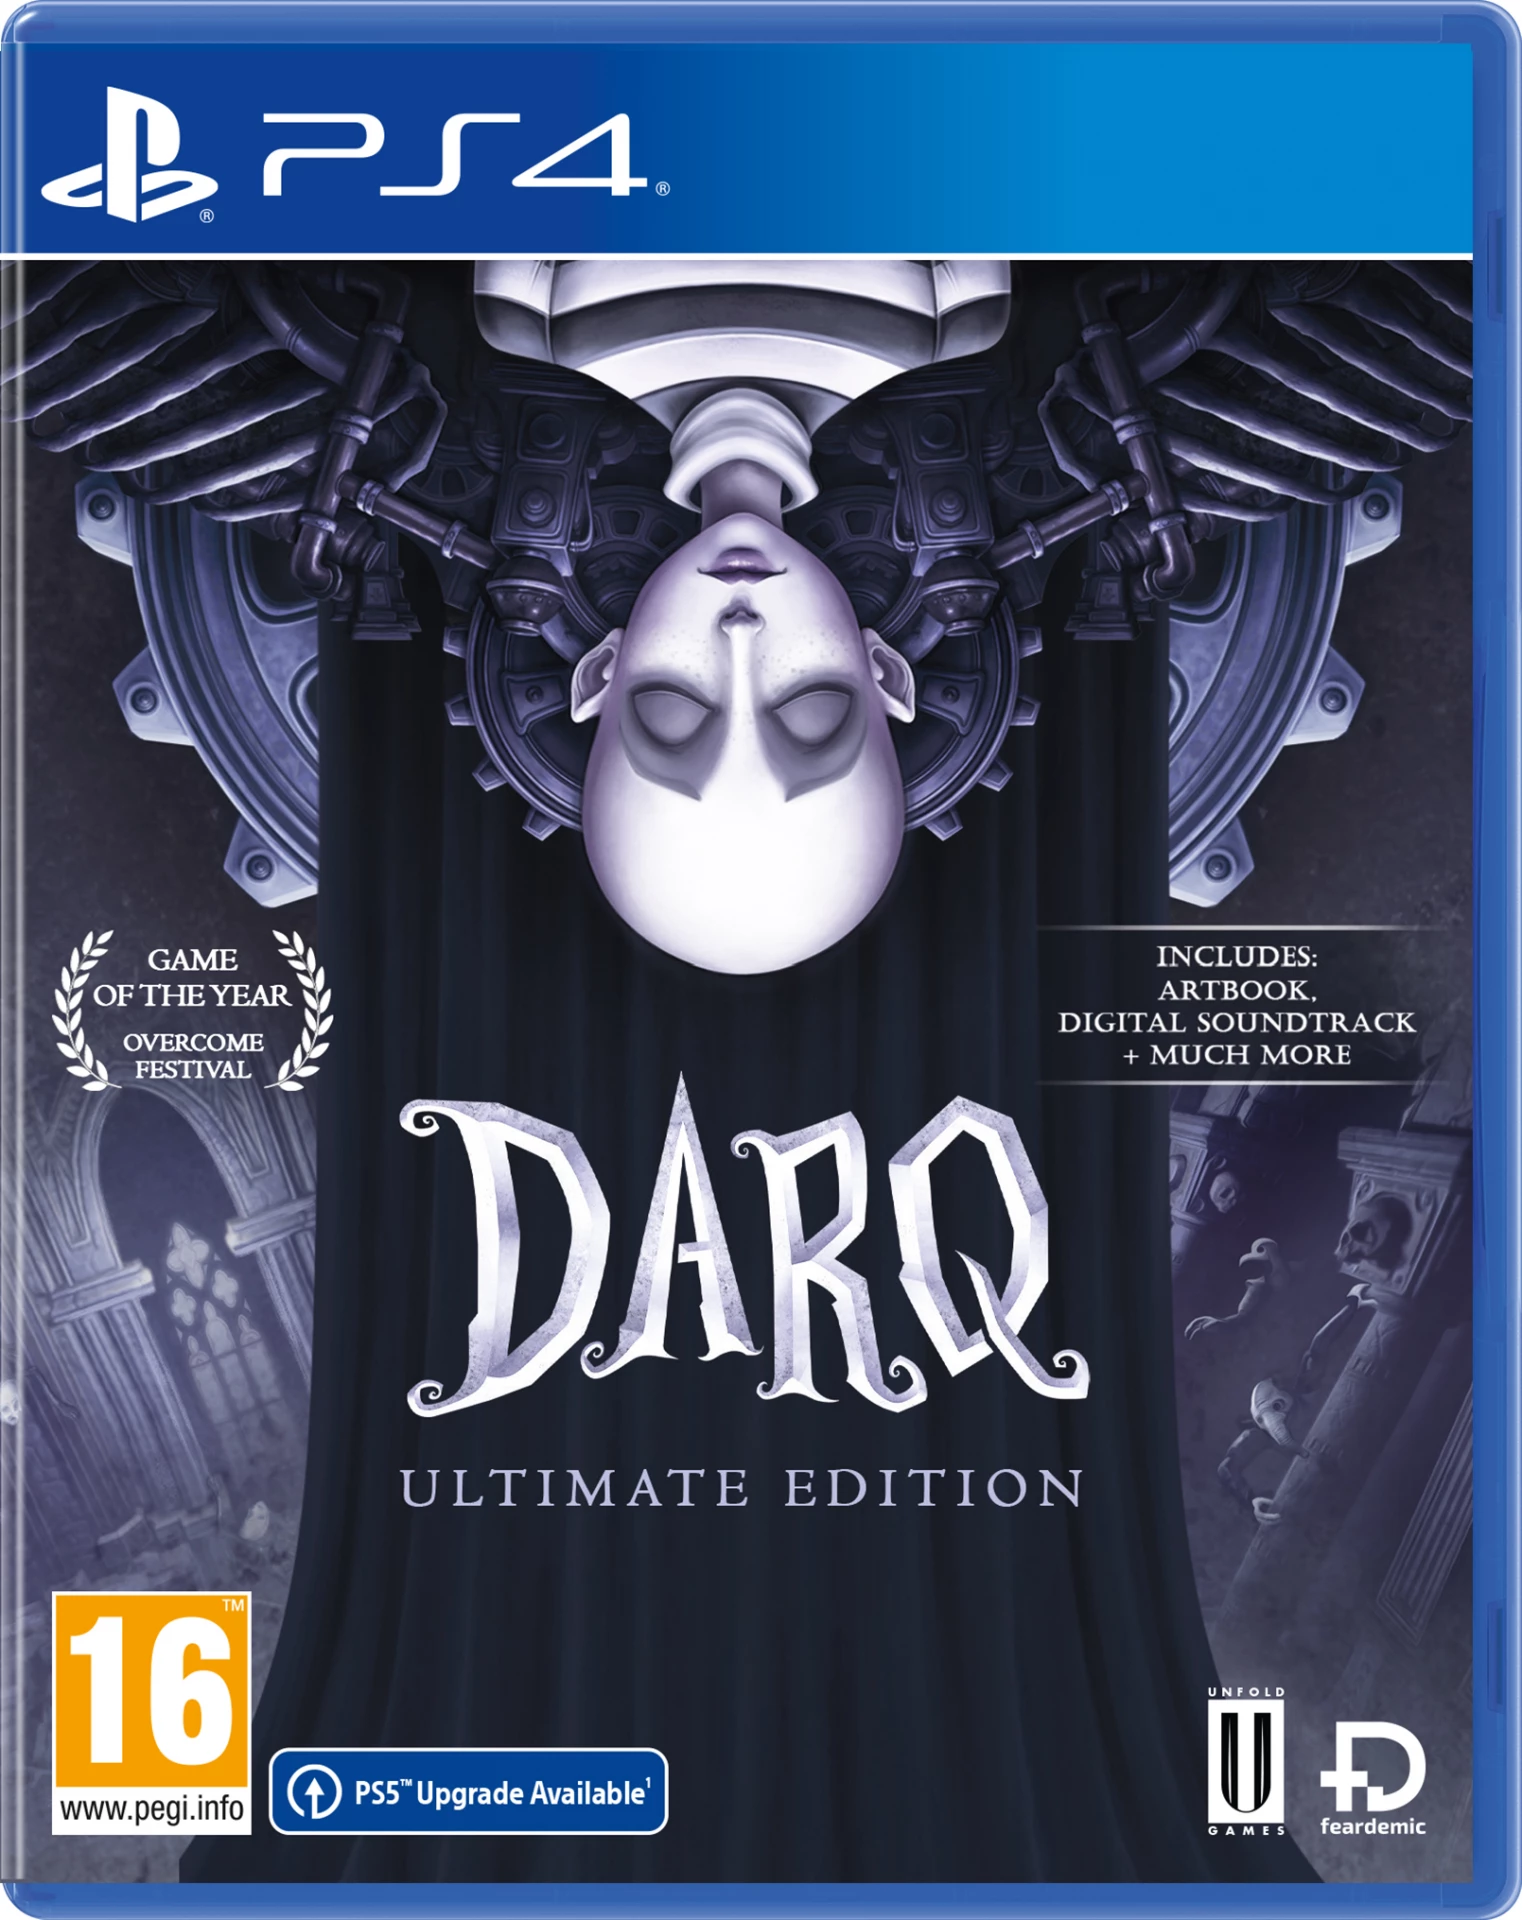 DARQ - Ultimate Edition (PS4), Unfold Games, Feardemic